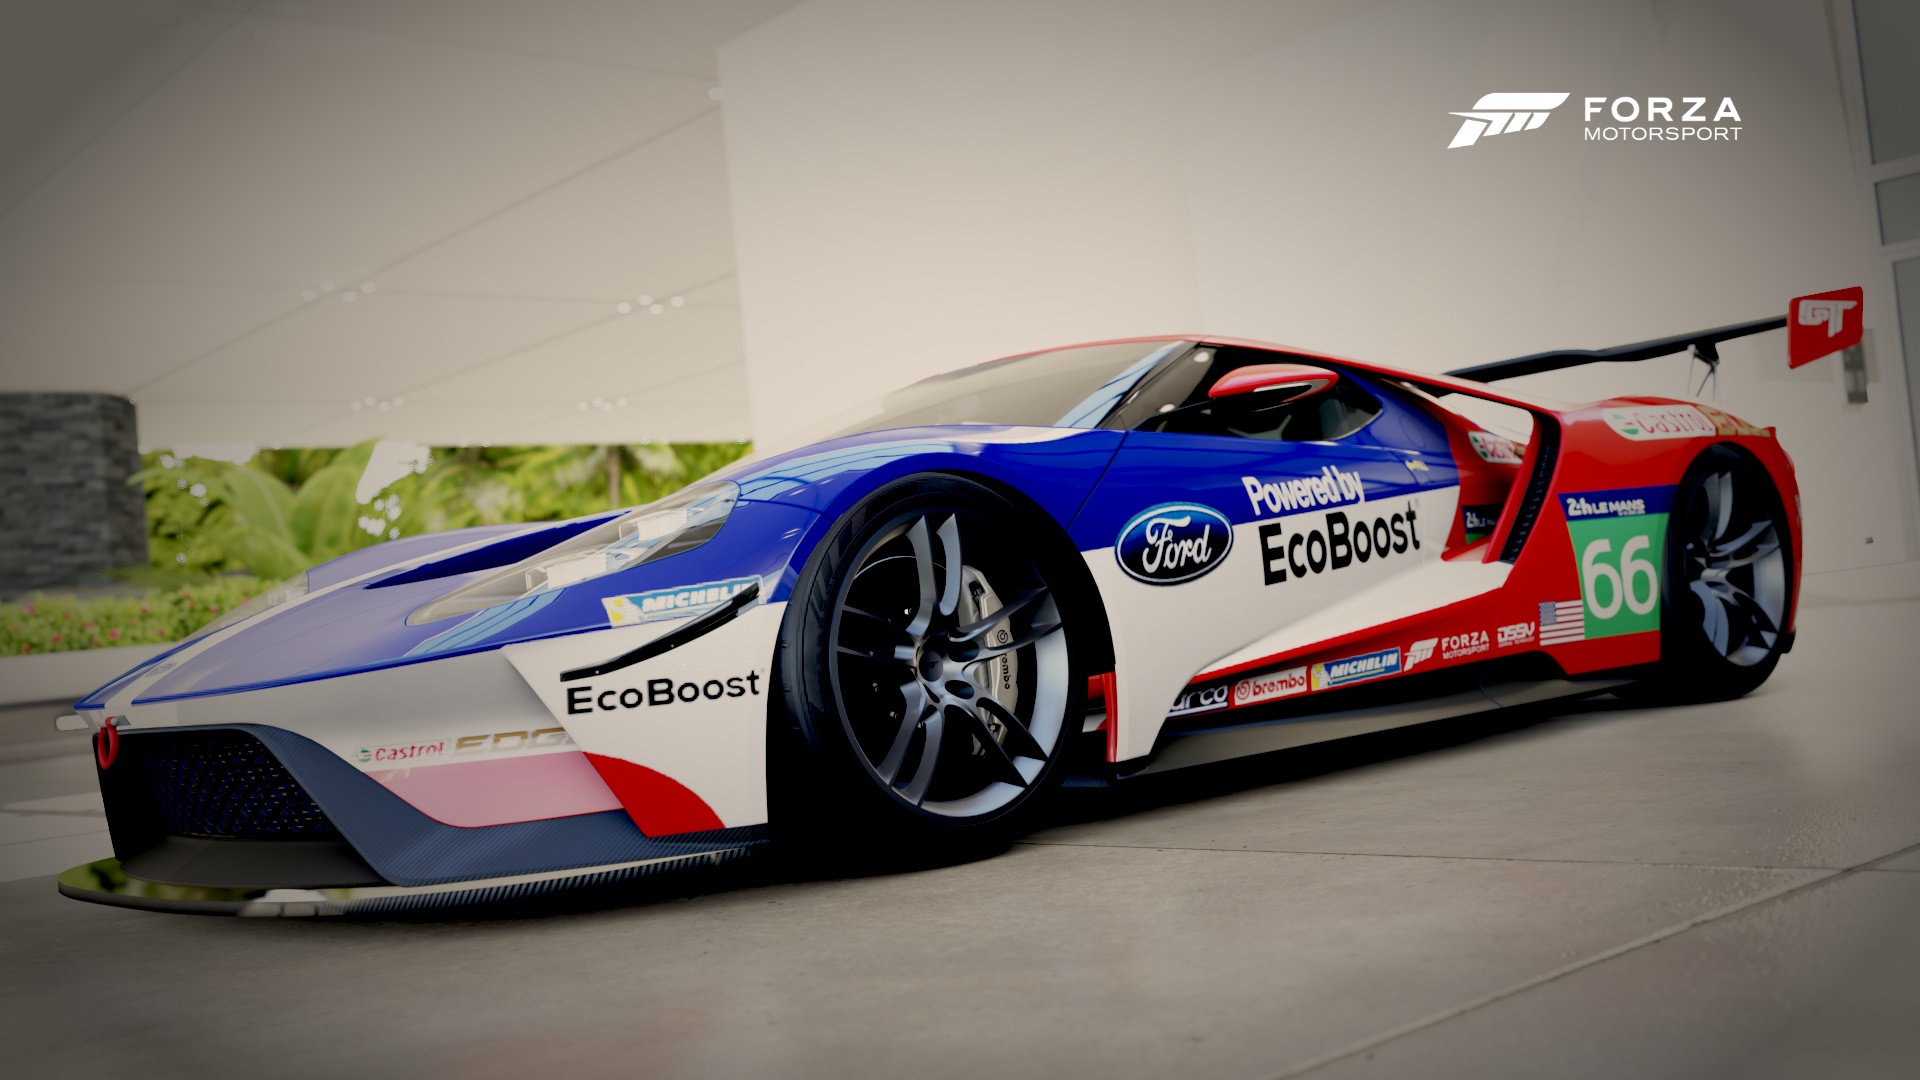 Free download wallpaper Ford, Ford Gt, Forza Motorsport 6, Video Game, Forza on your PC desktop